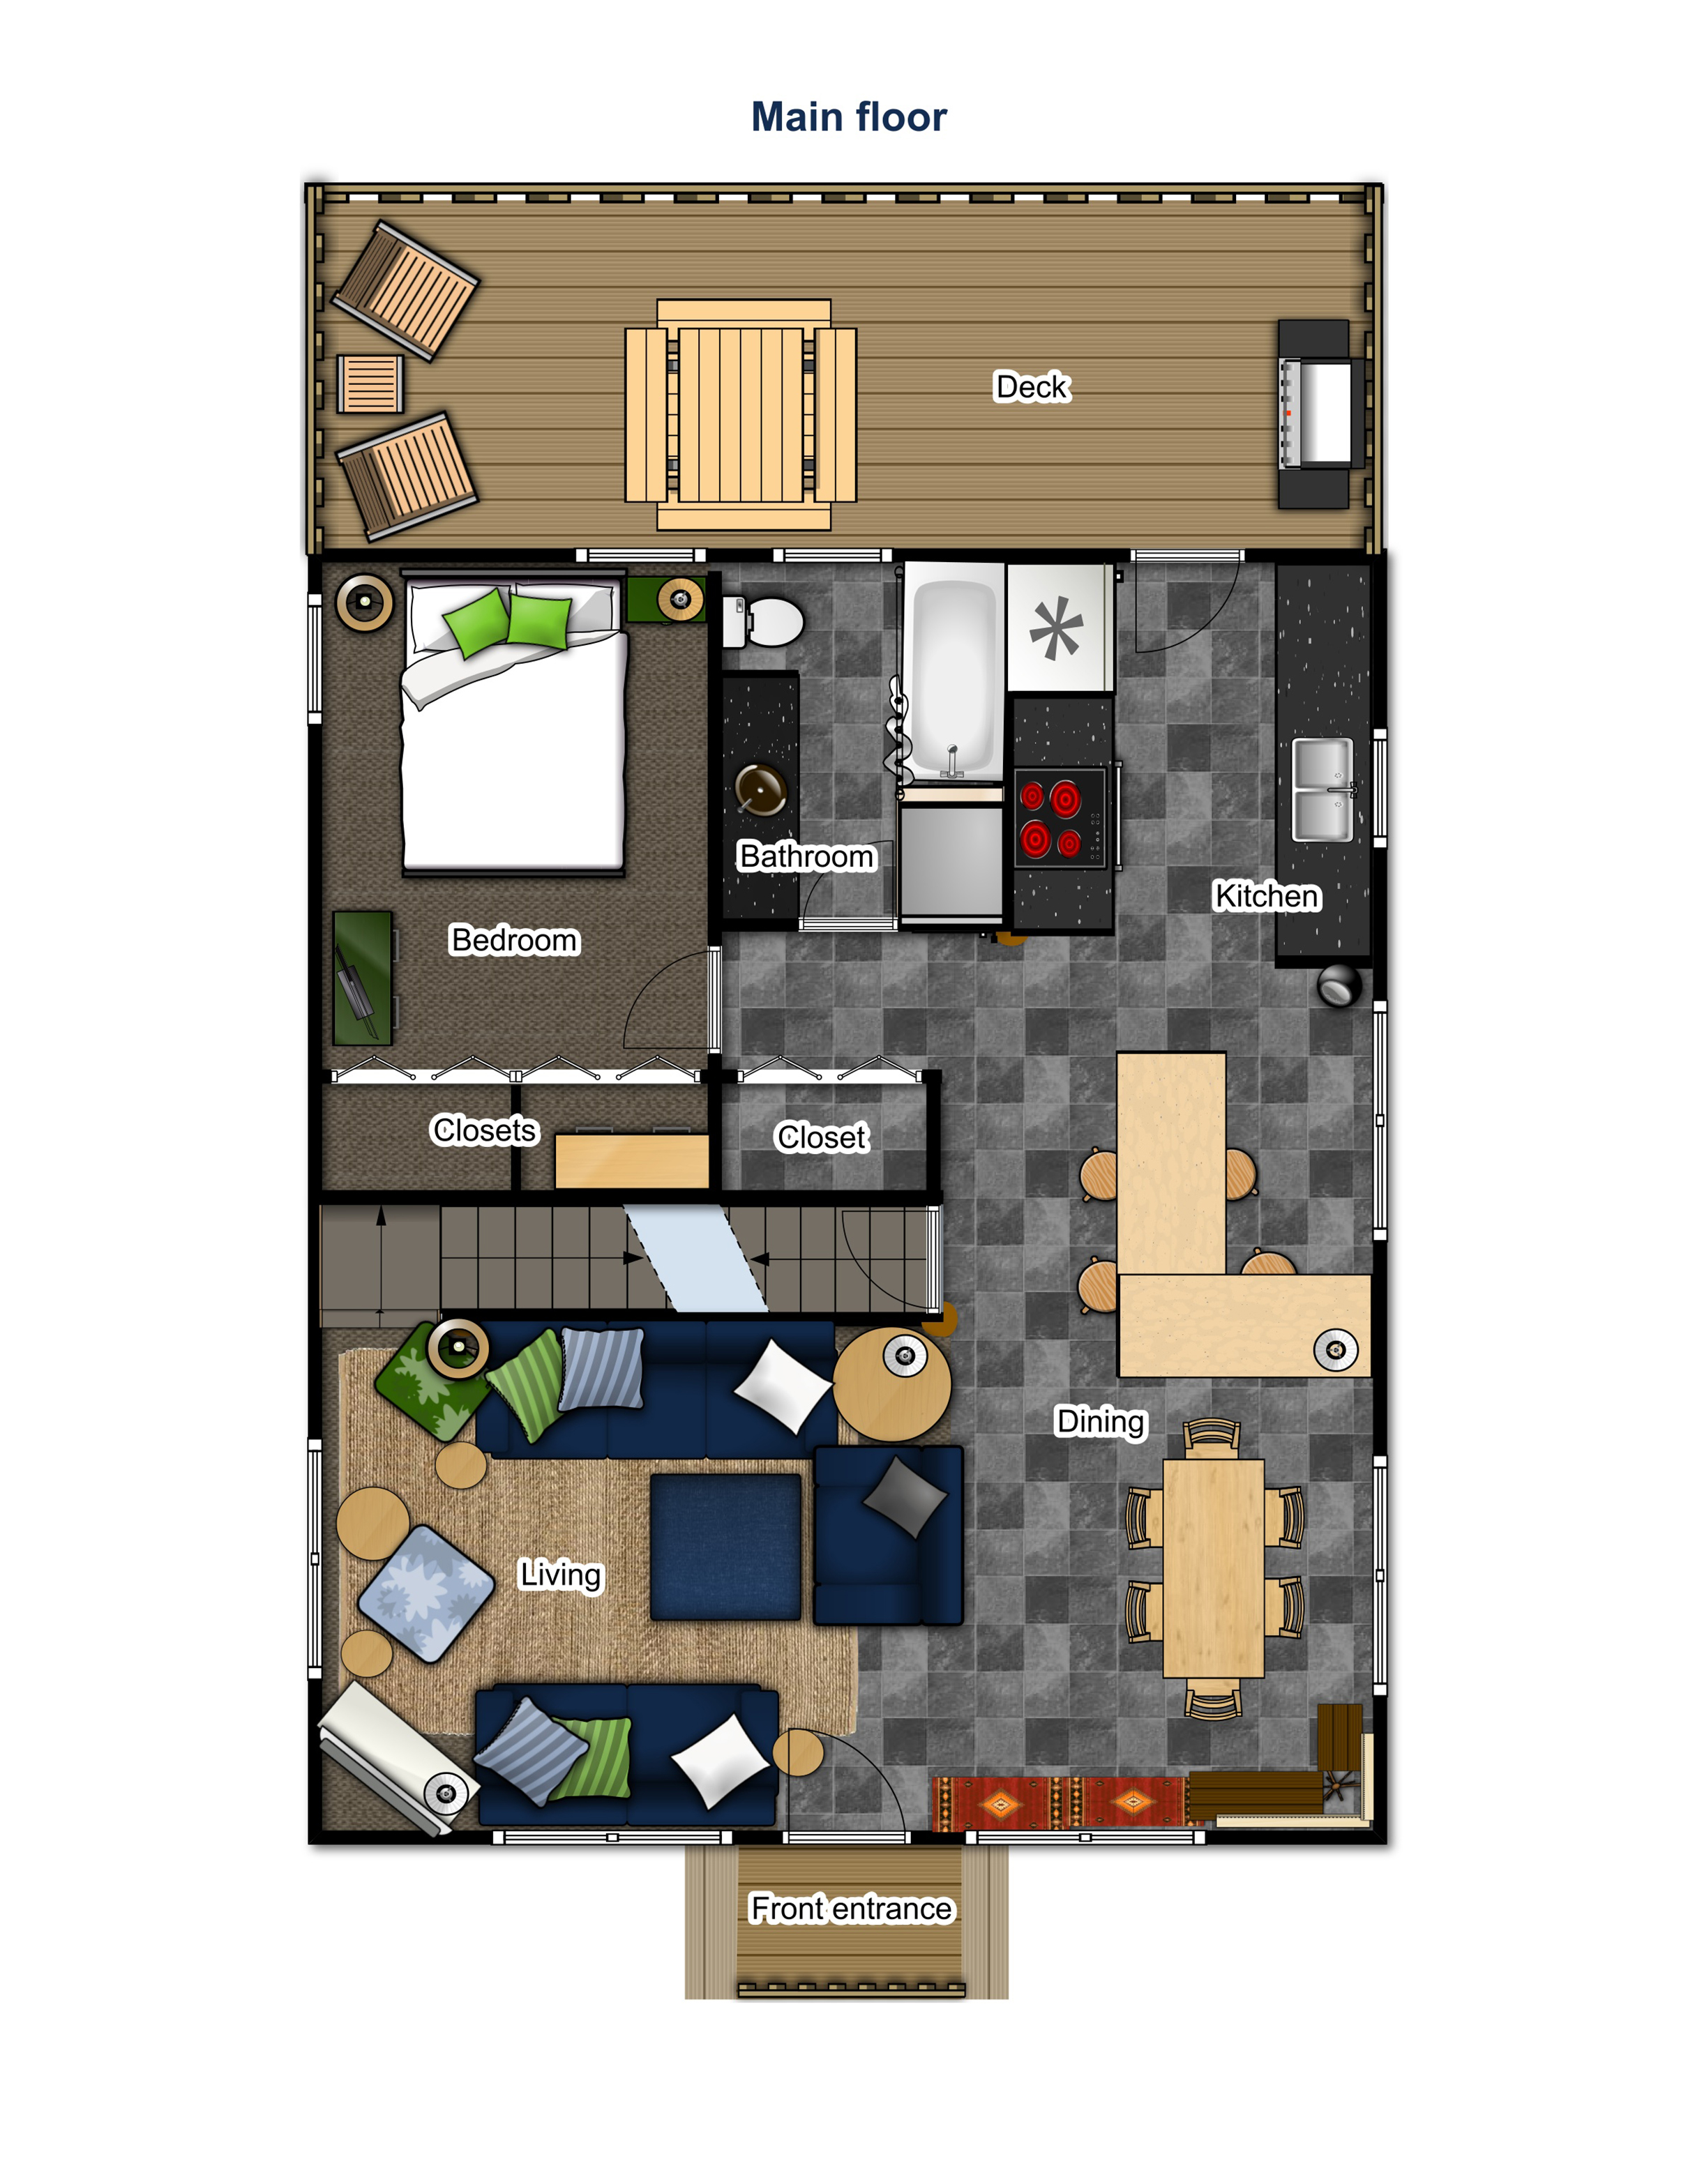 Main floor — front entry, living room, dining, kitchen, bedroom, bathroom and deck